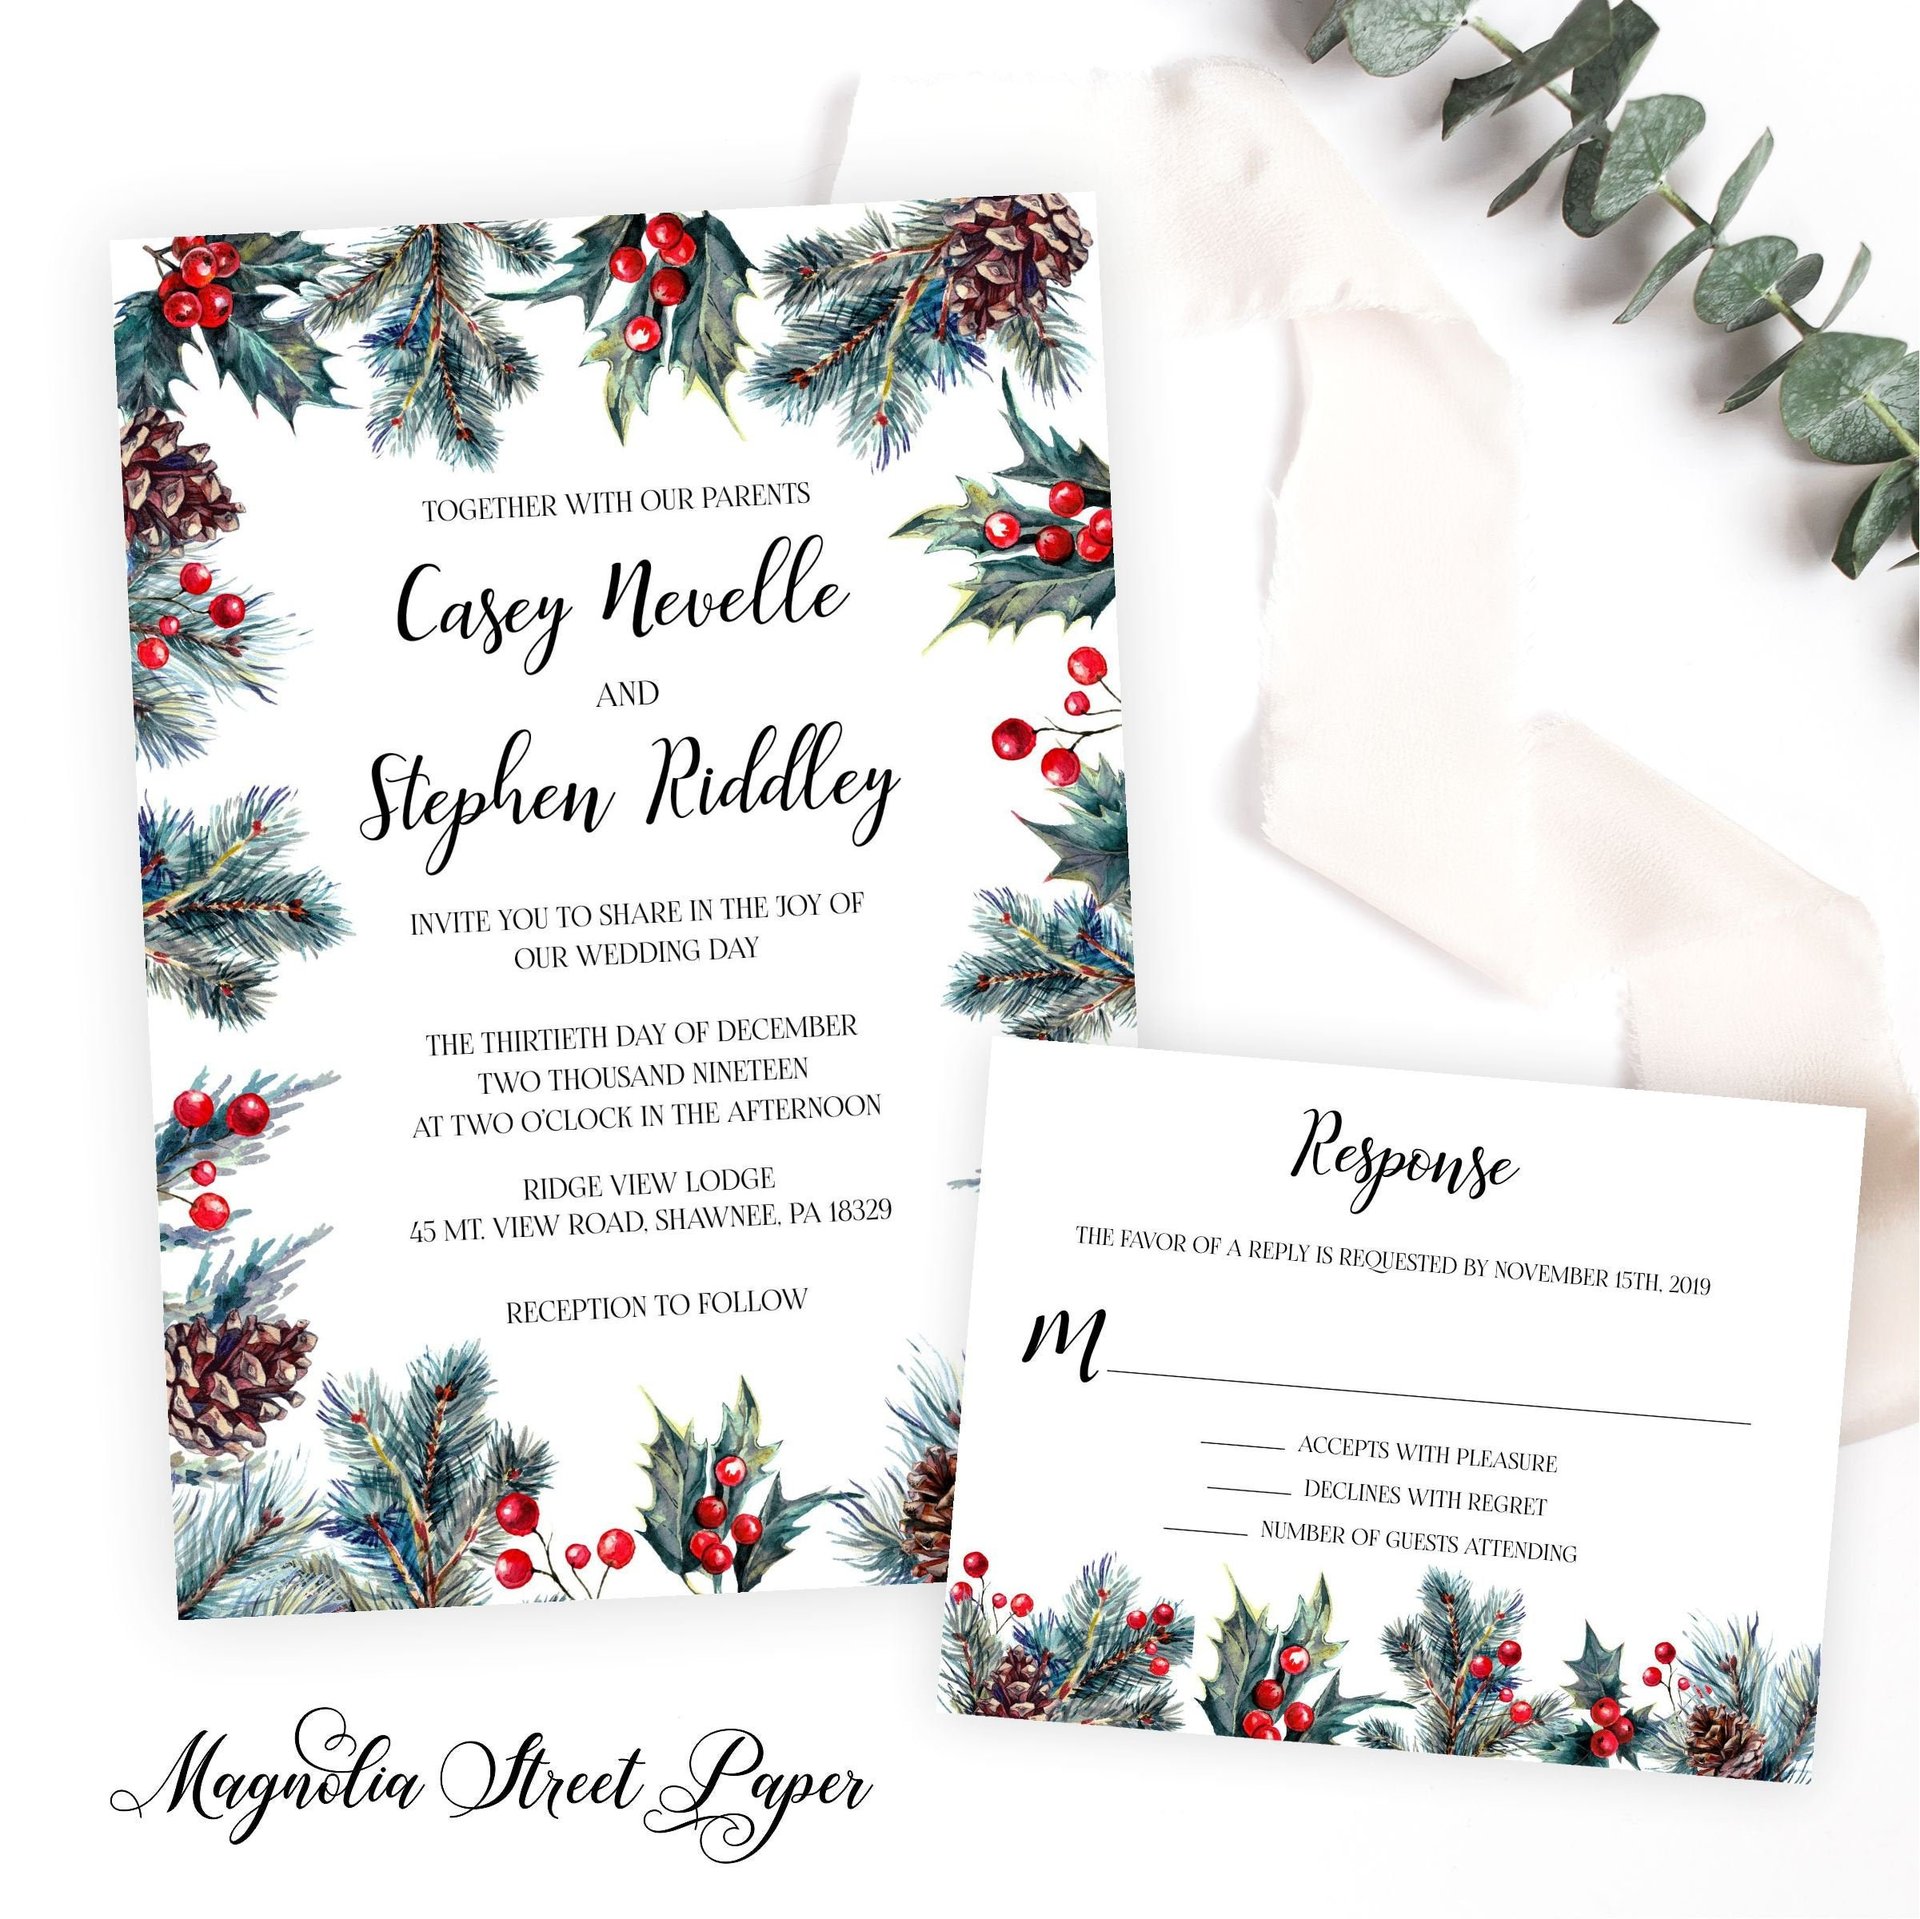 Pine and Holly Wedding Invitation, Winter or Christmas, Includes RSVP Card